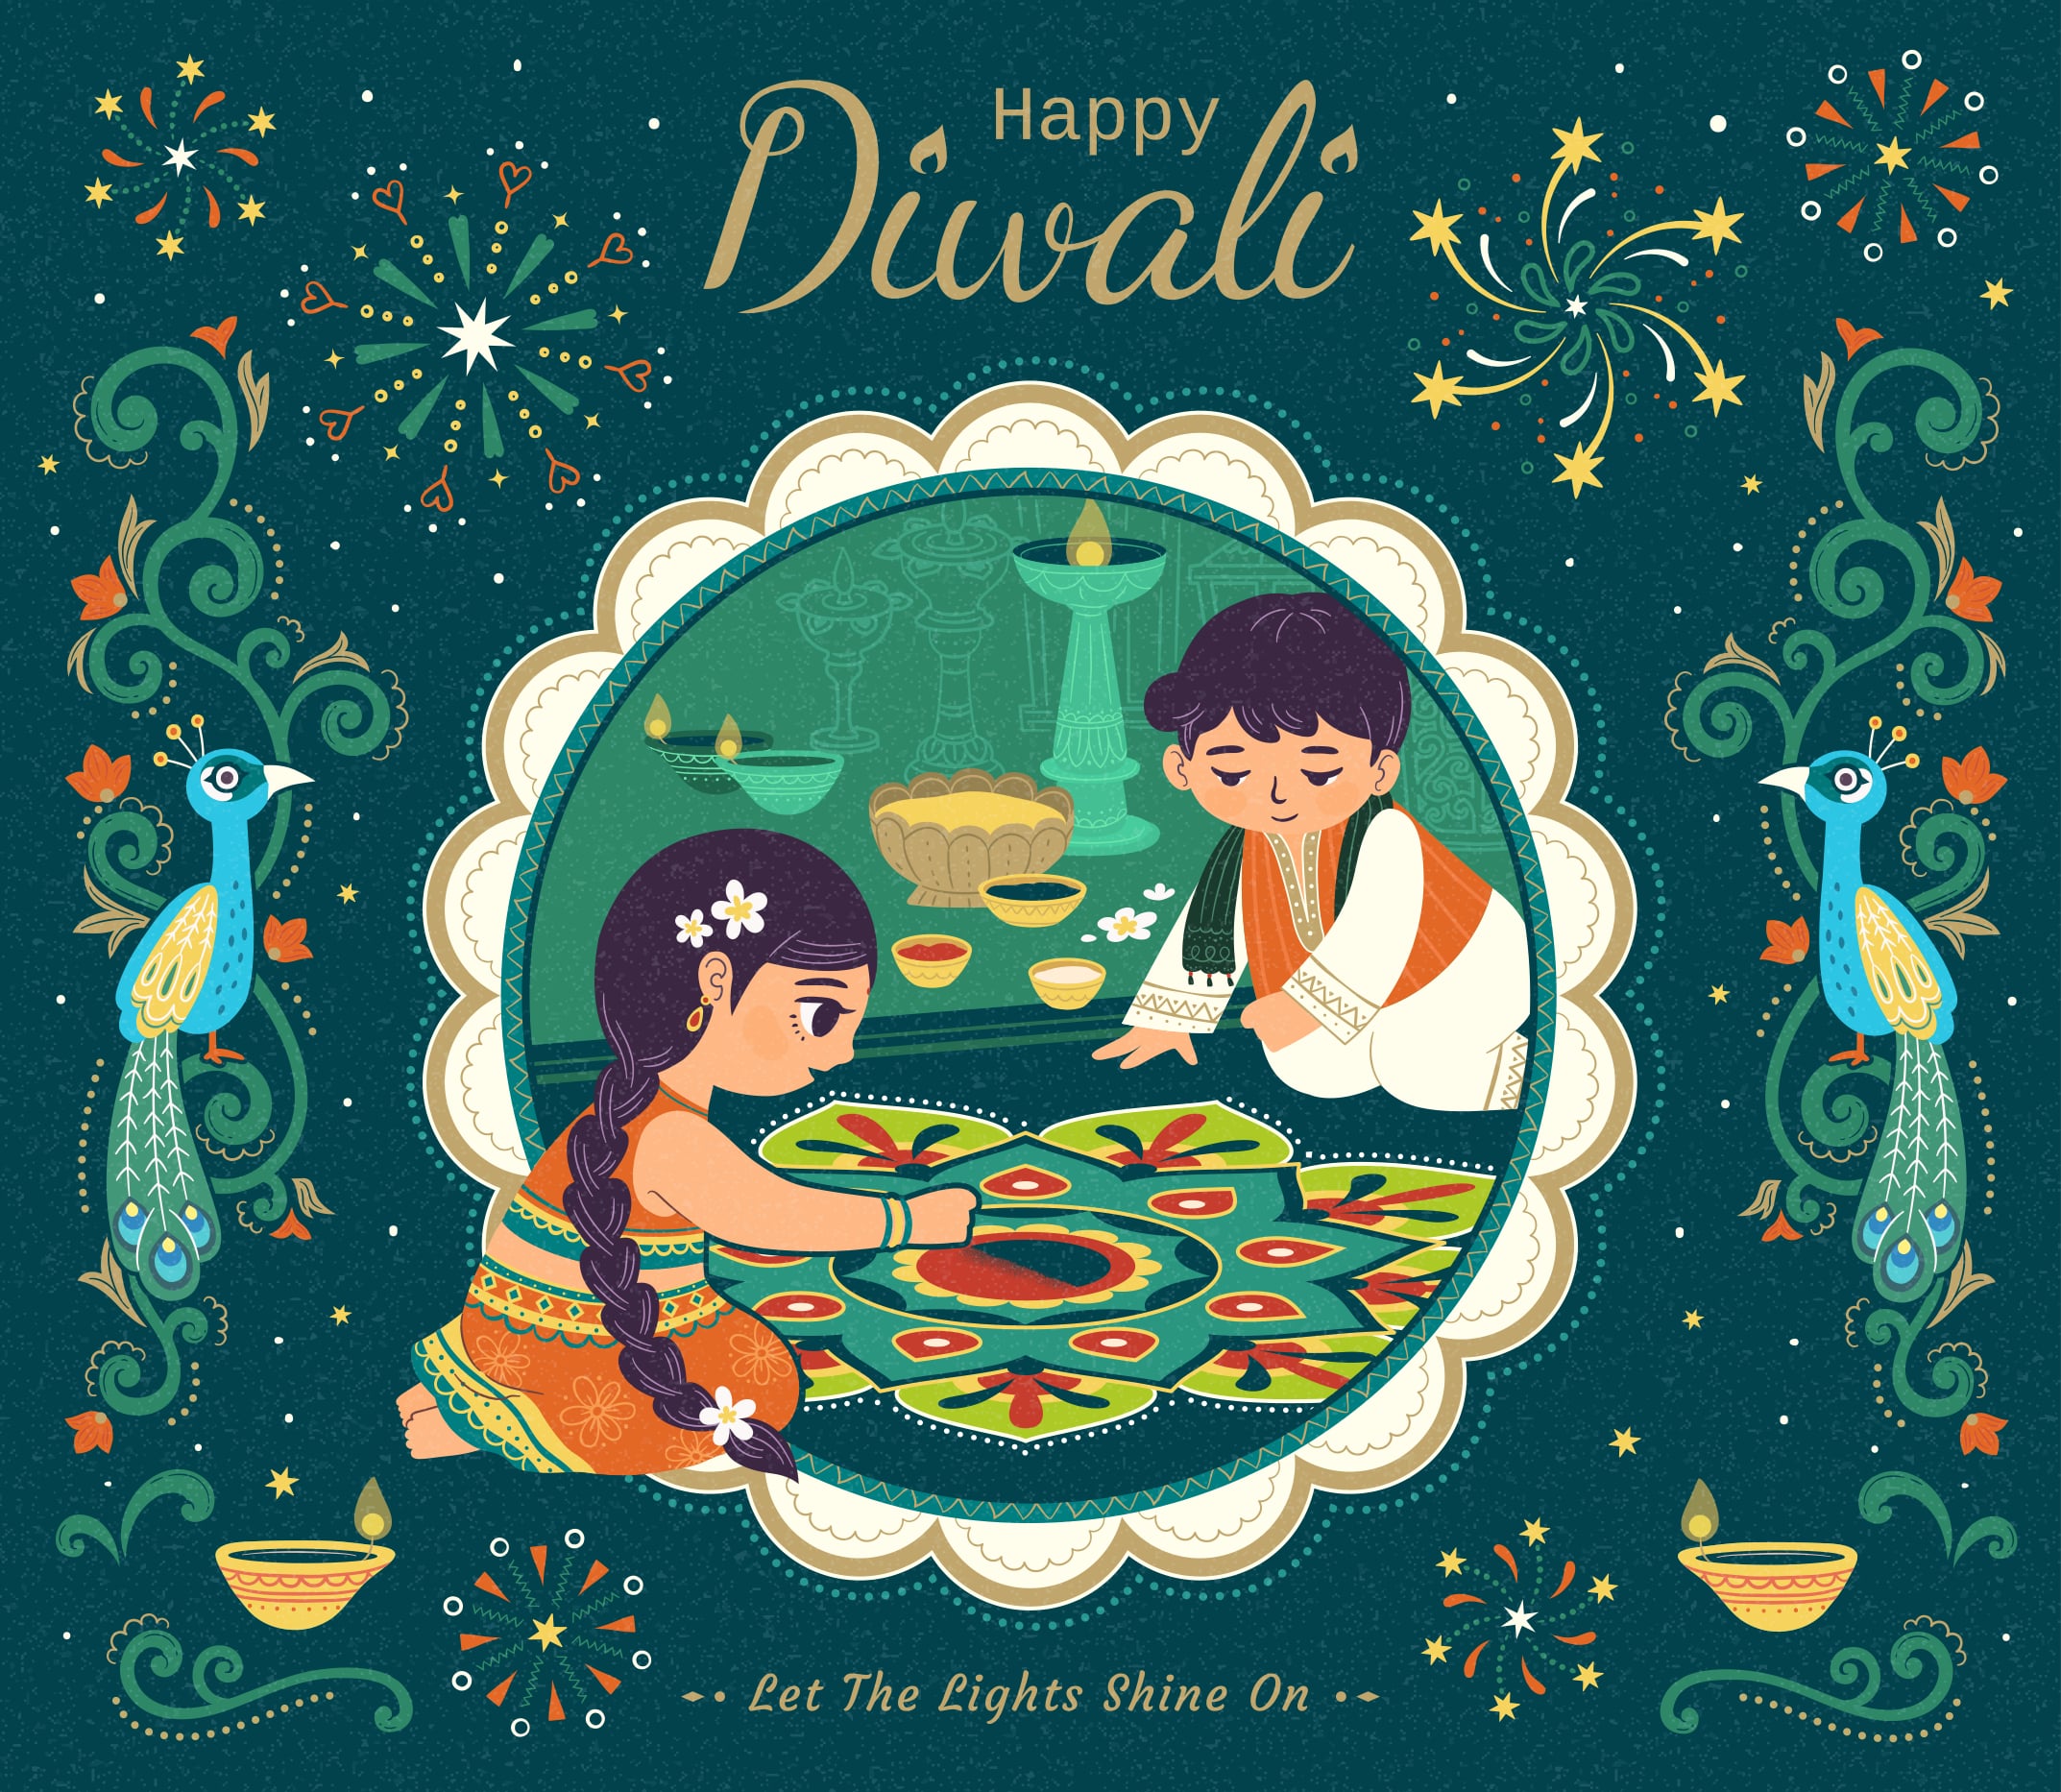 happy Diwali images and wishes